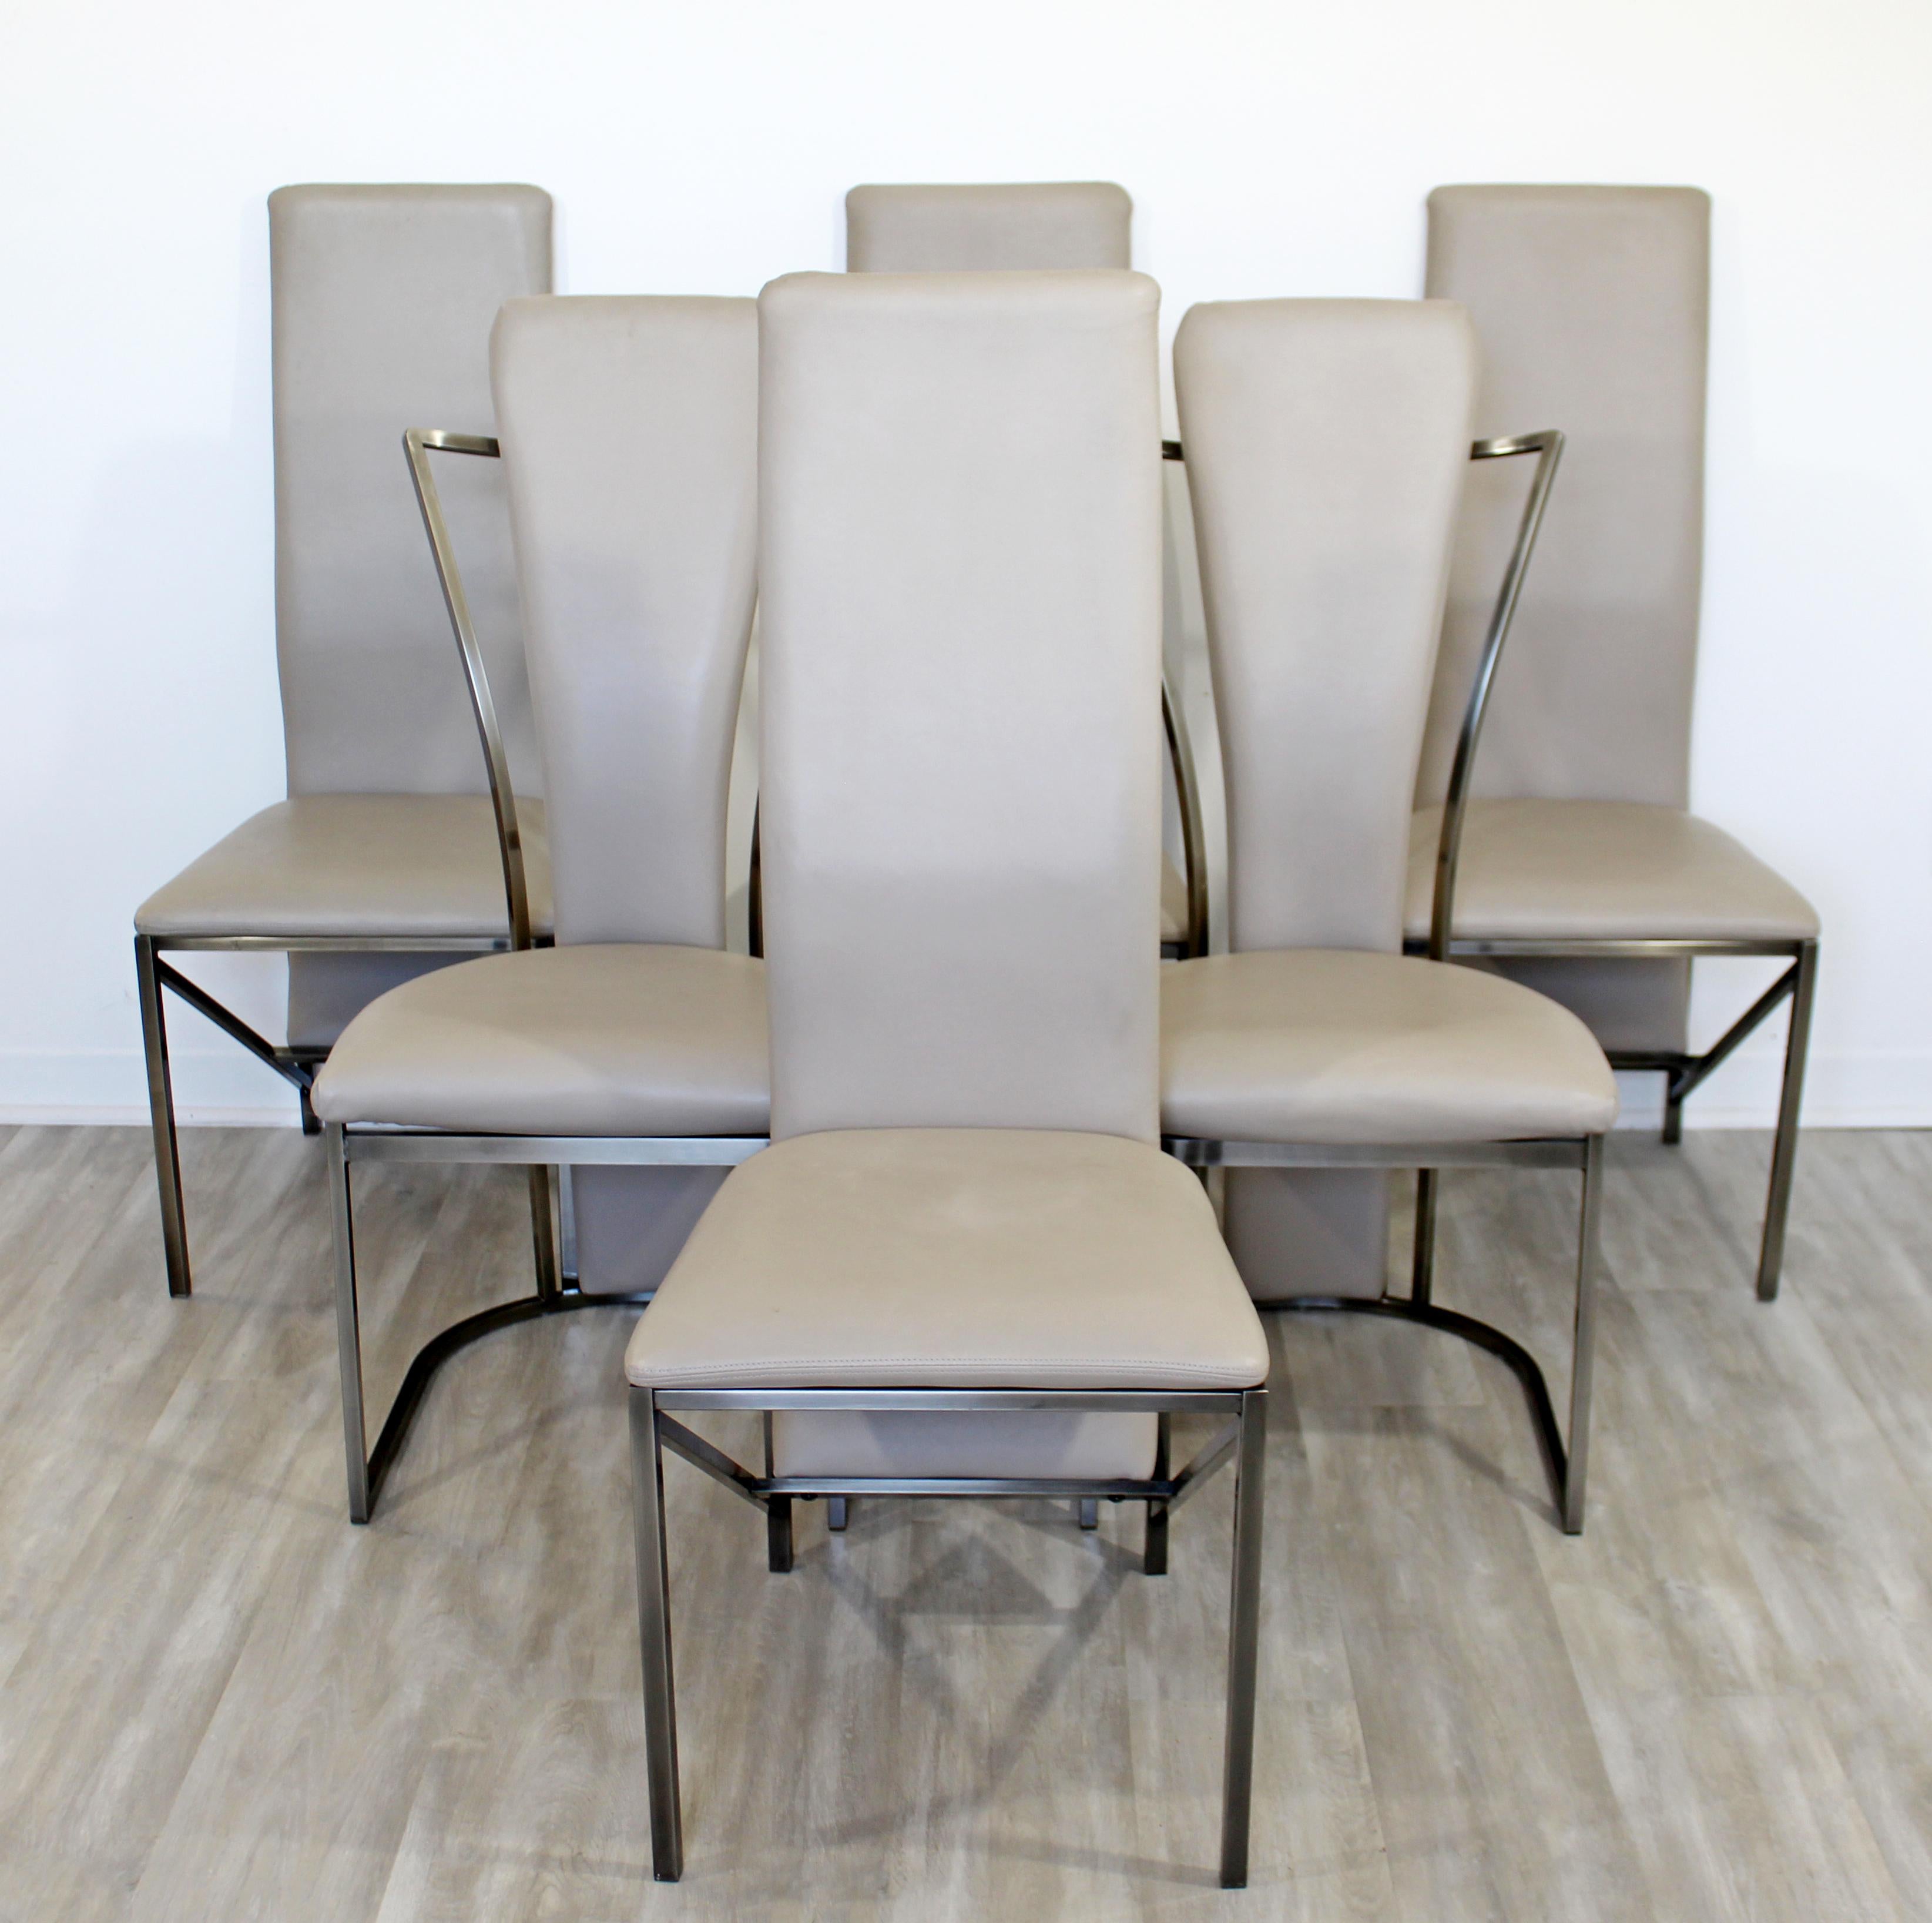 For your consideration is a spectacular set of six dining chairs, with leather seats on chrome bases, by The Design Institute of America, circa 1990. In excellent condition, with very slight wear to the upholstery. The dimensions are 18